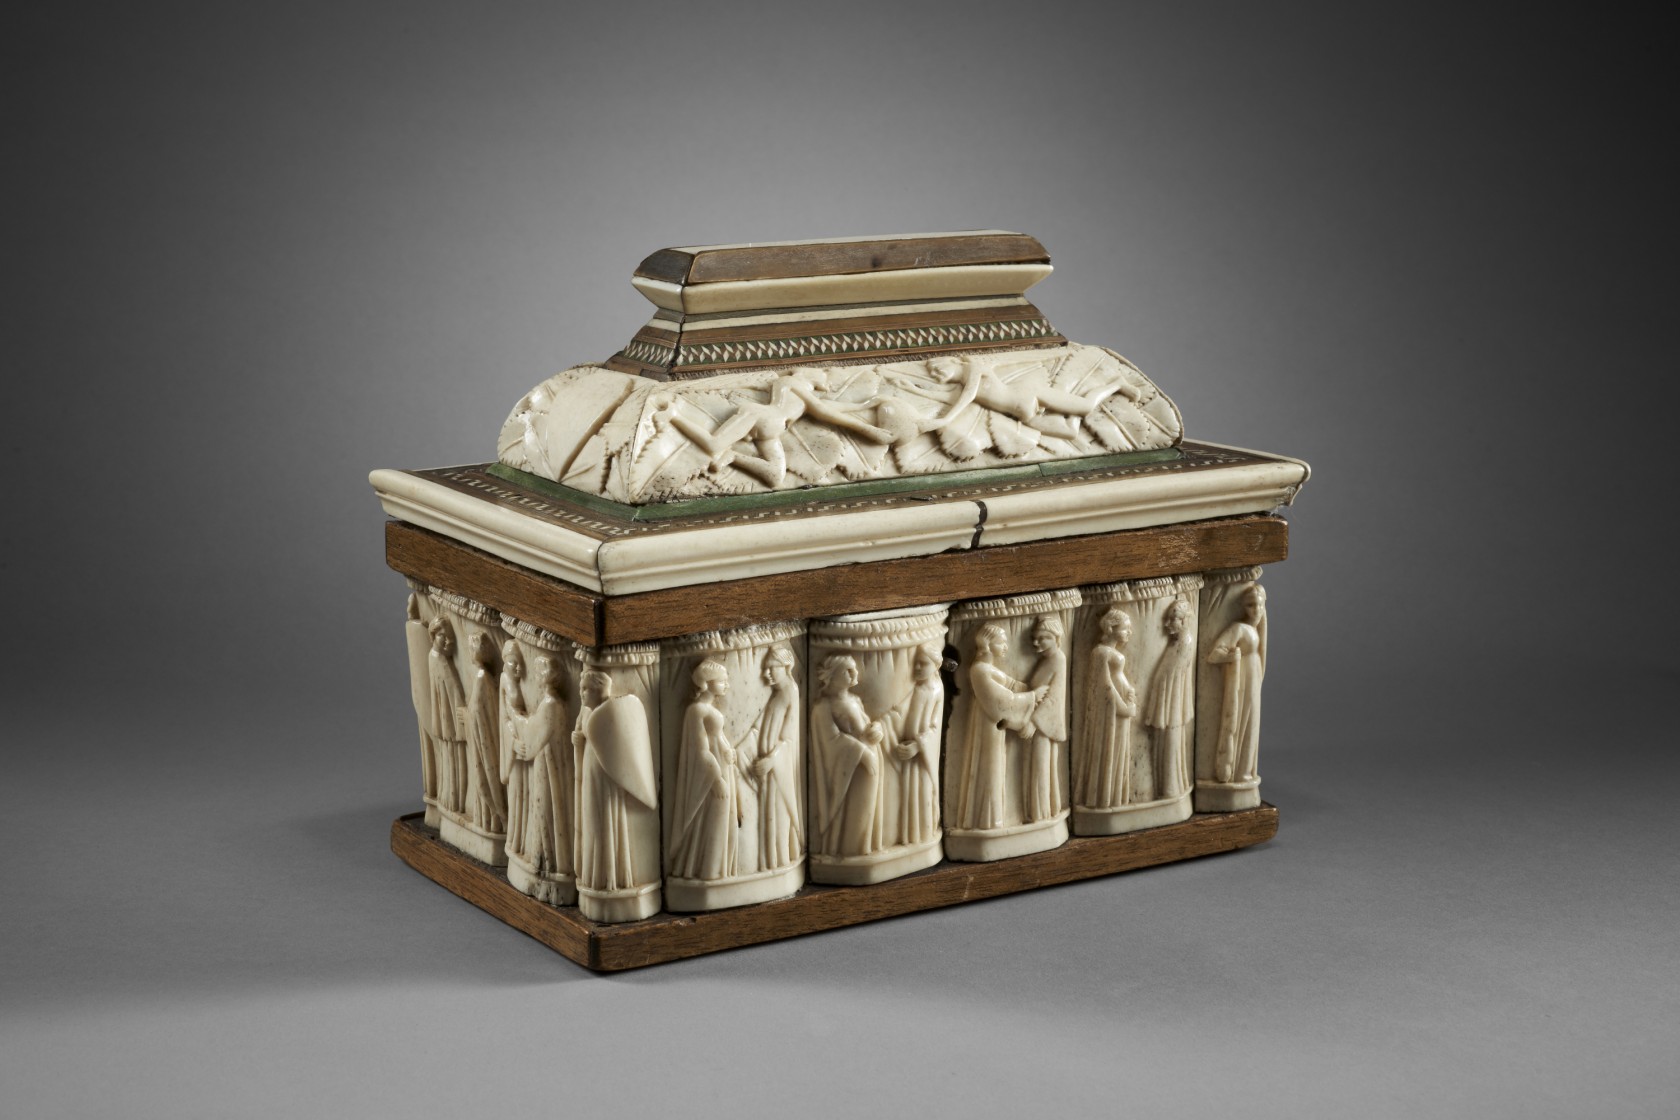 Marriage casket from the 15th century